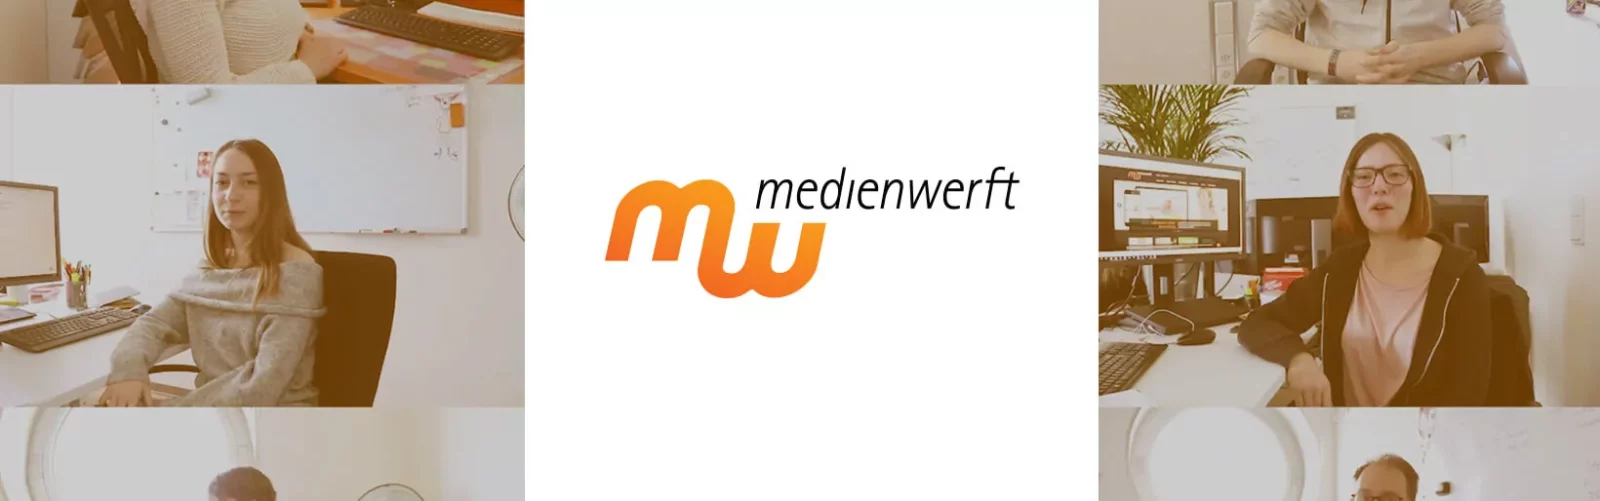 New video: Training at Medienwerft